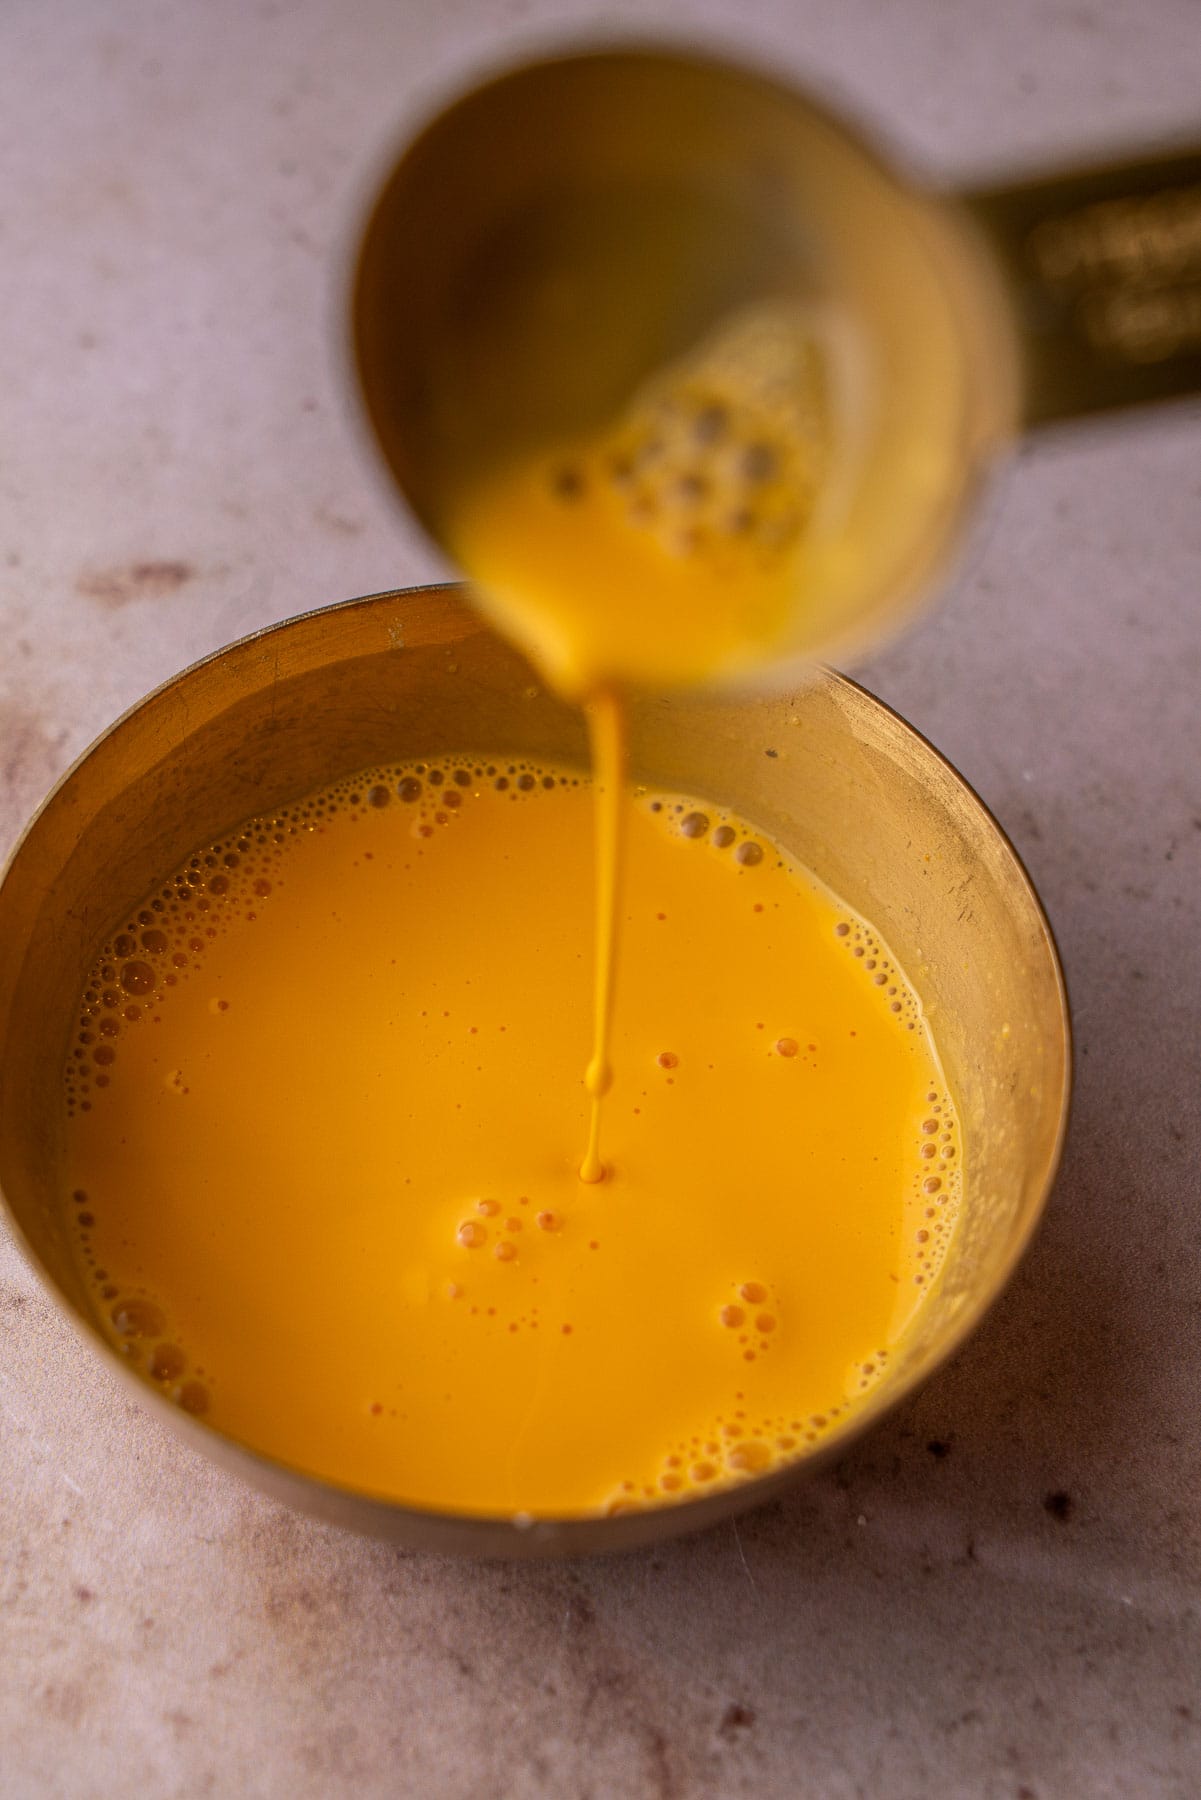 A tablespoon scooping up custard milk from a bowl.